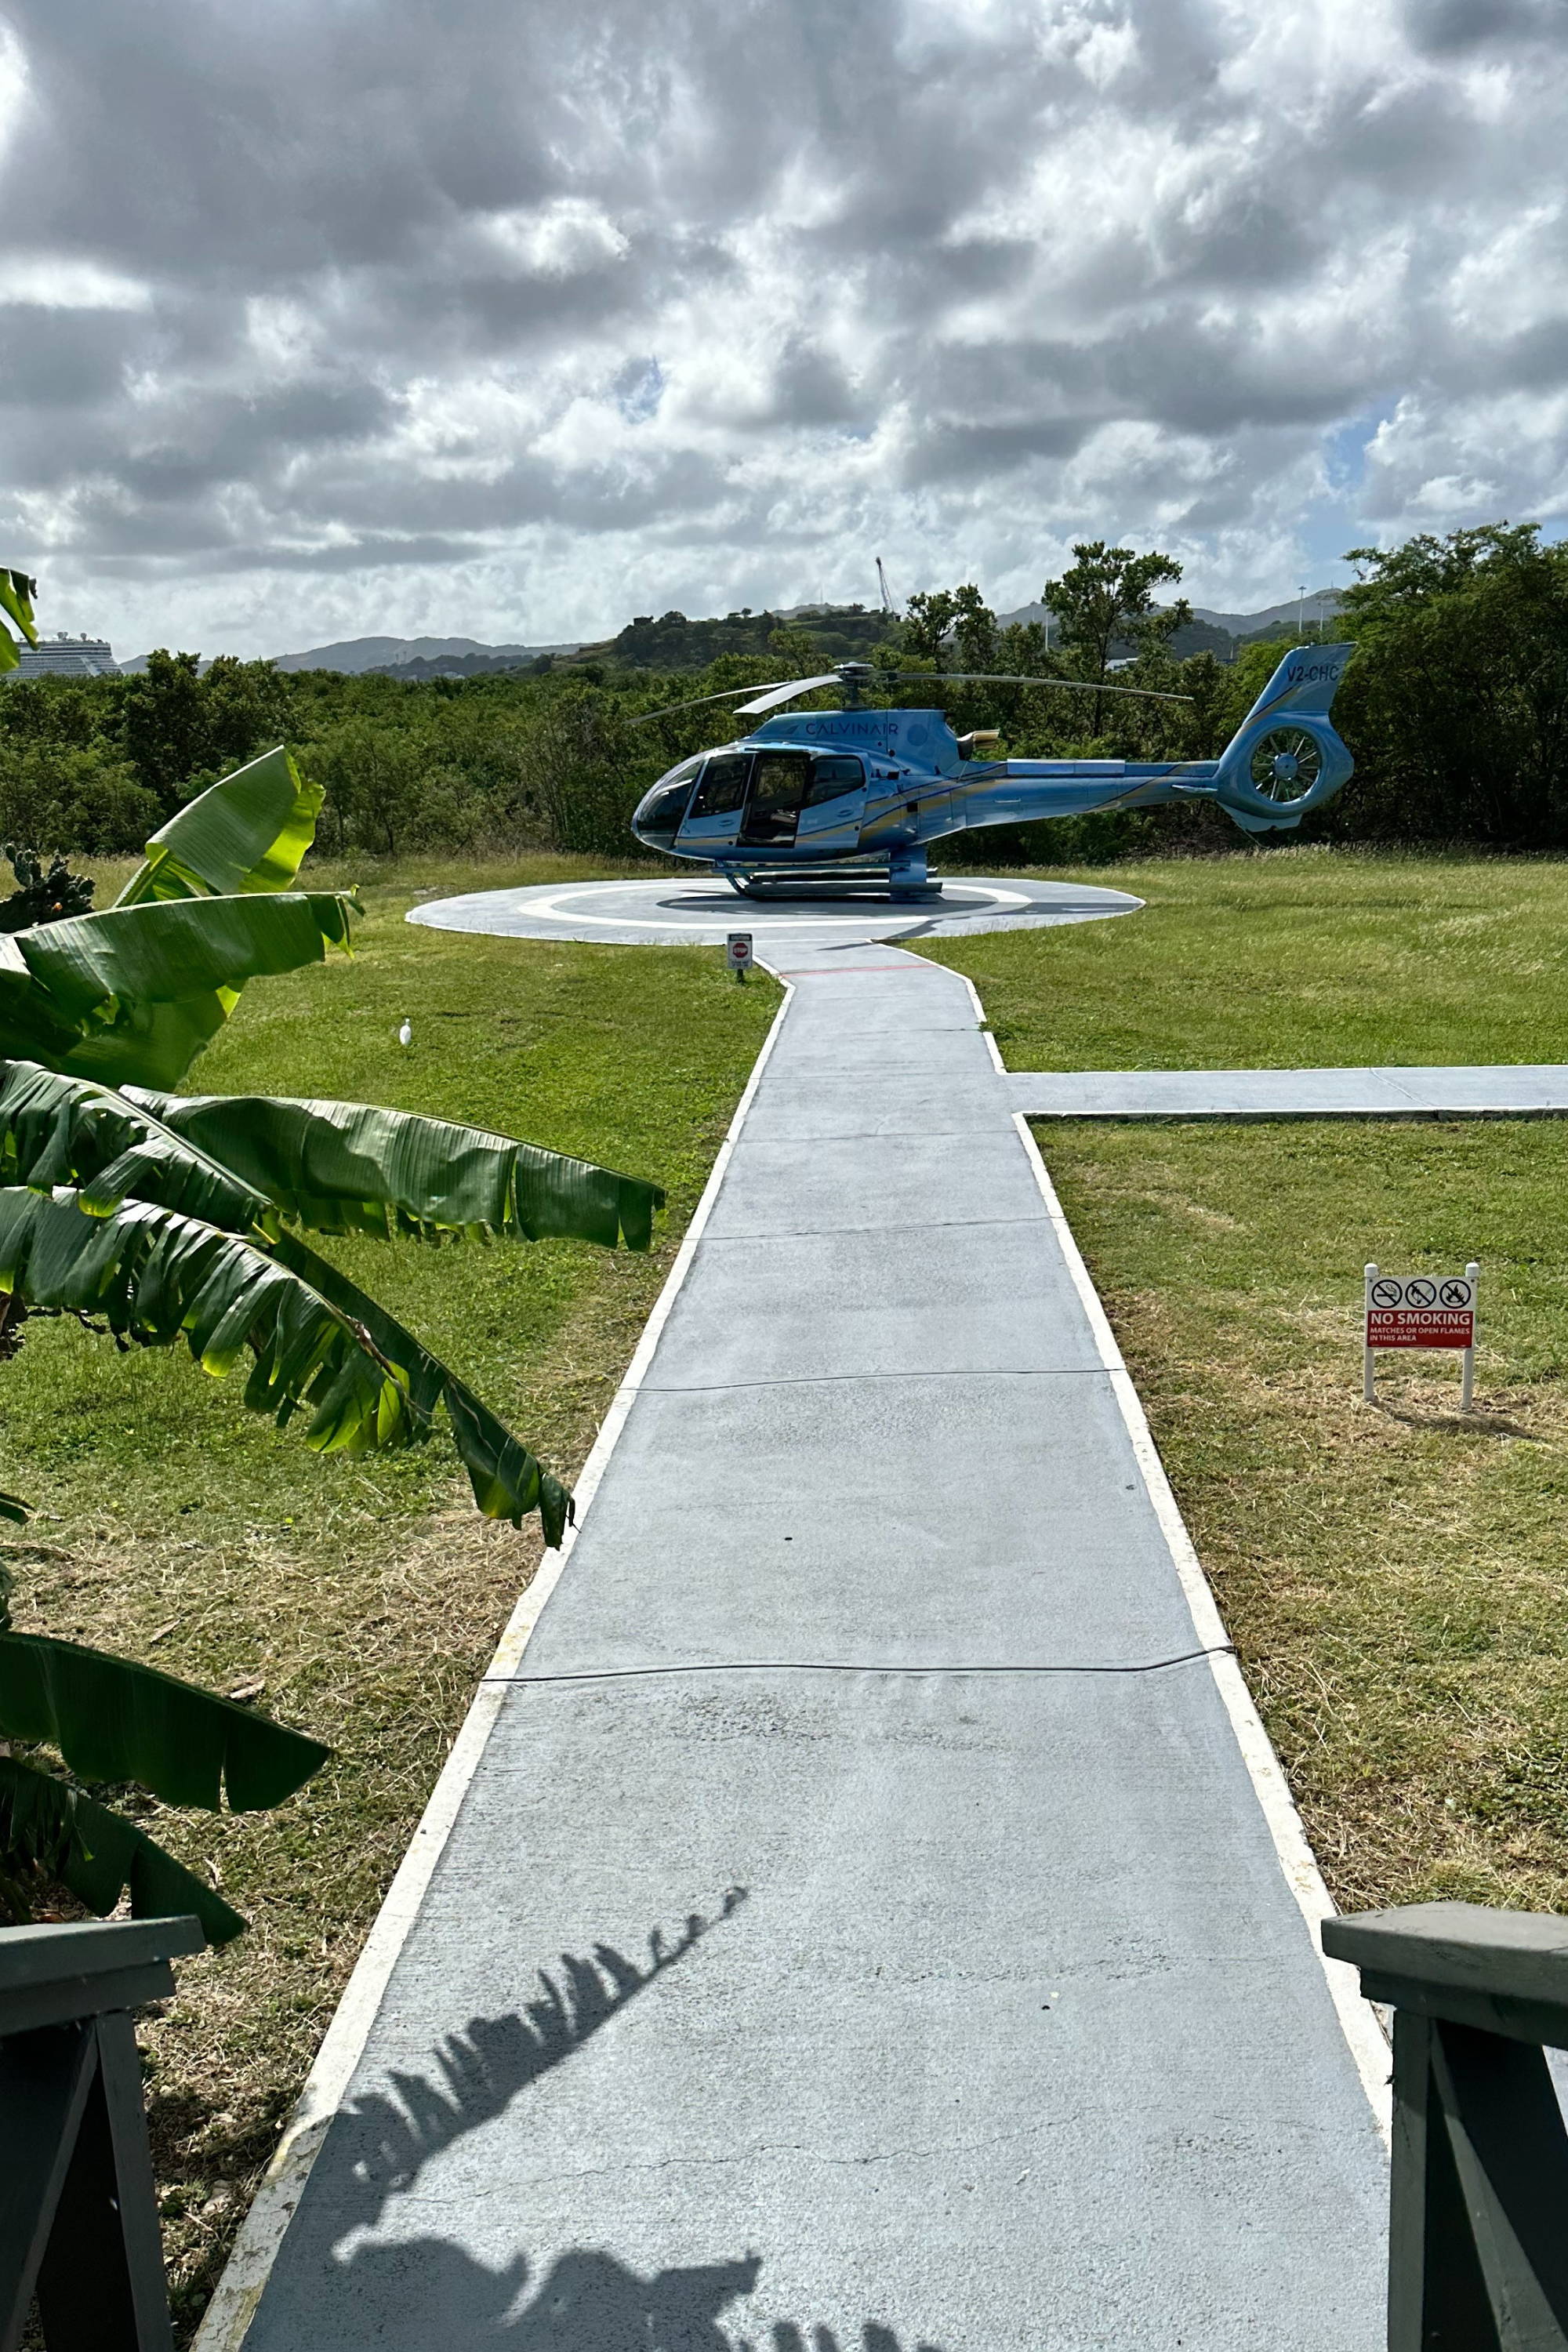 Helicopter pad in the island of Barbuda in the Caribbean